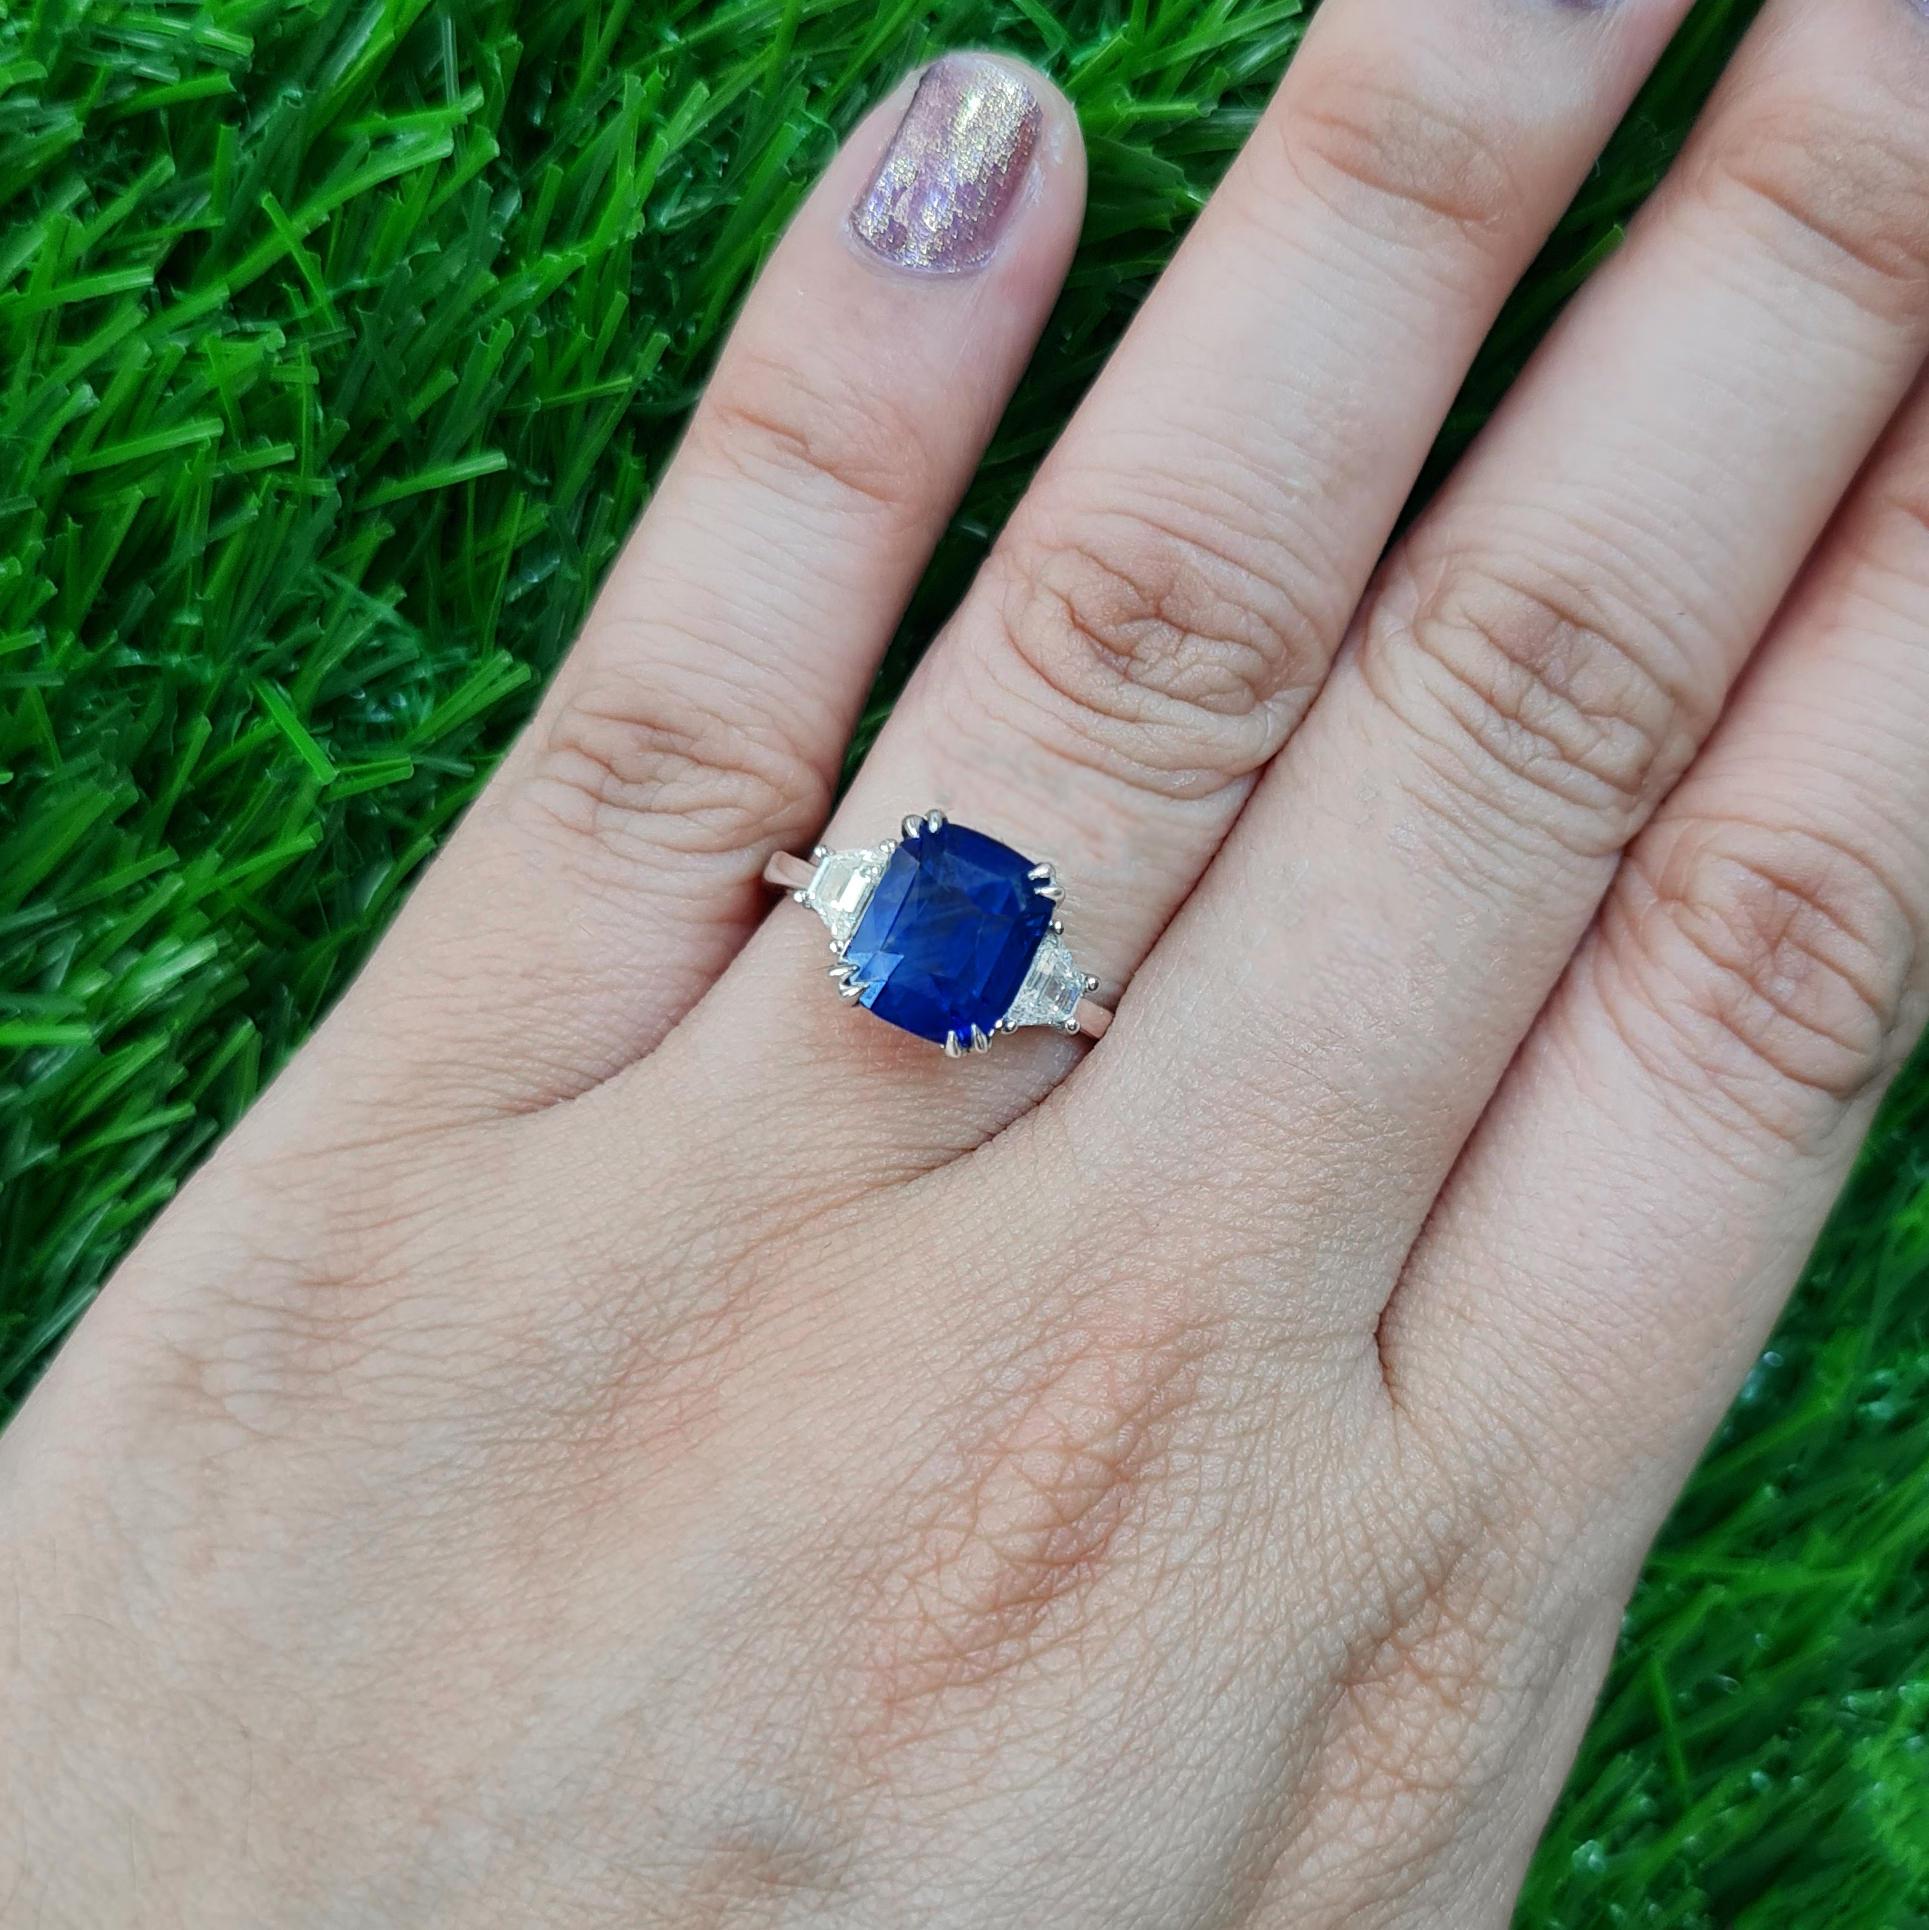 It comes with the appraisal by GIA GG/AJP
Blue Sapphire = 3.3 Carat
2 Diamonds = 0.38 Carats
( Color: H, Clarity: SI )
Metal: 18K White Gold
Ring Size: 7* US
*It can be resized complimentary